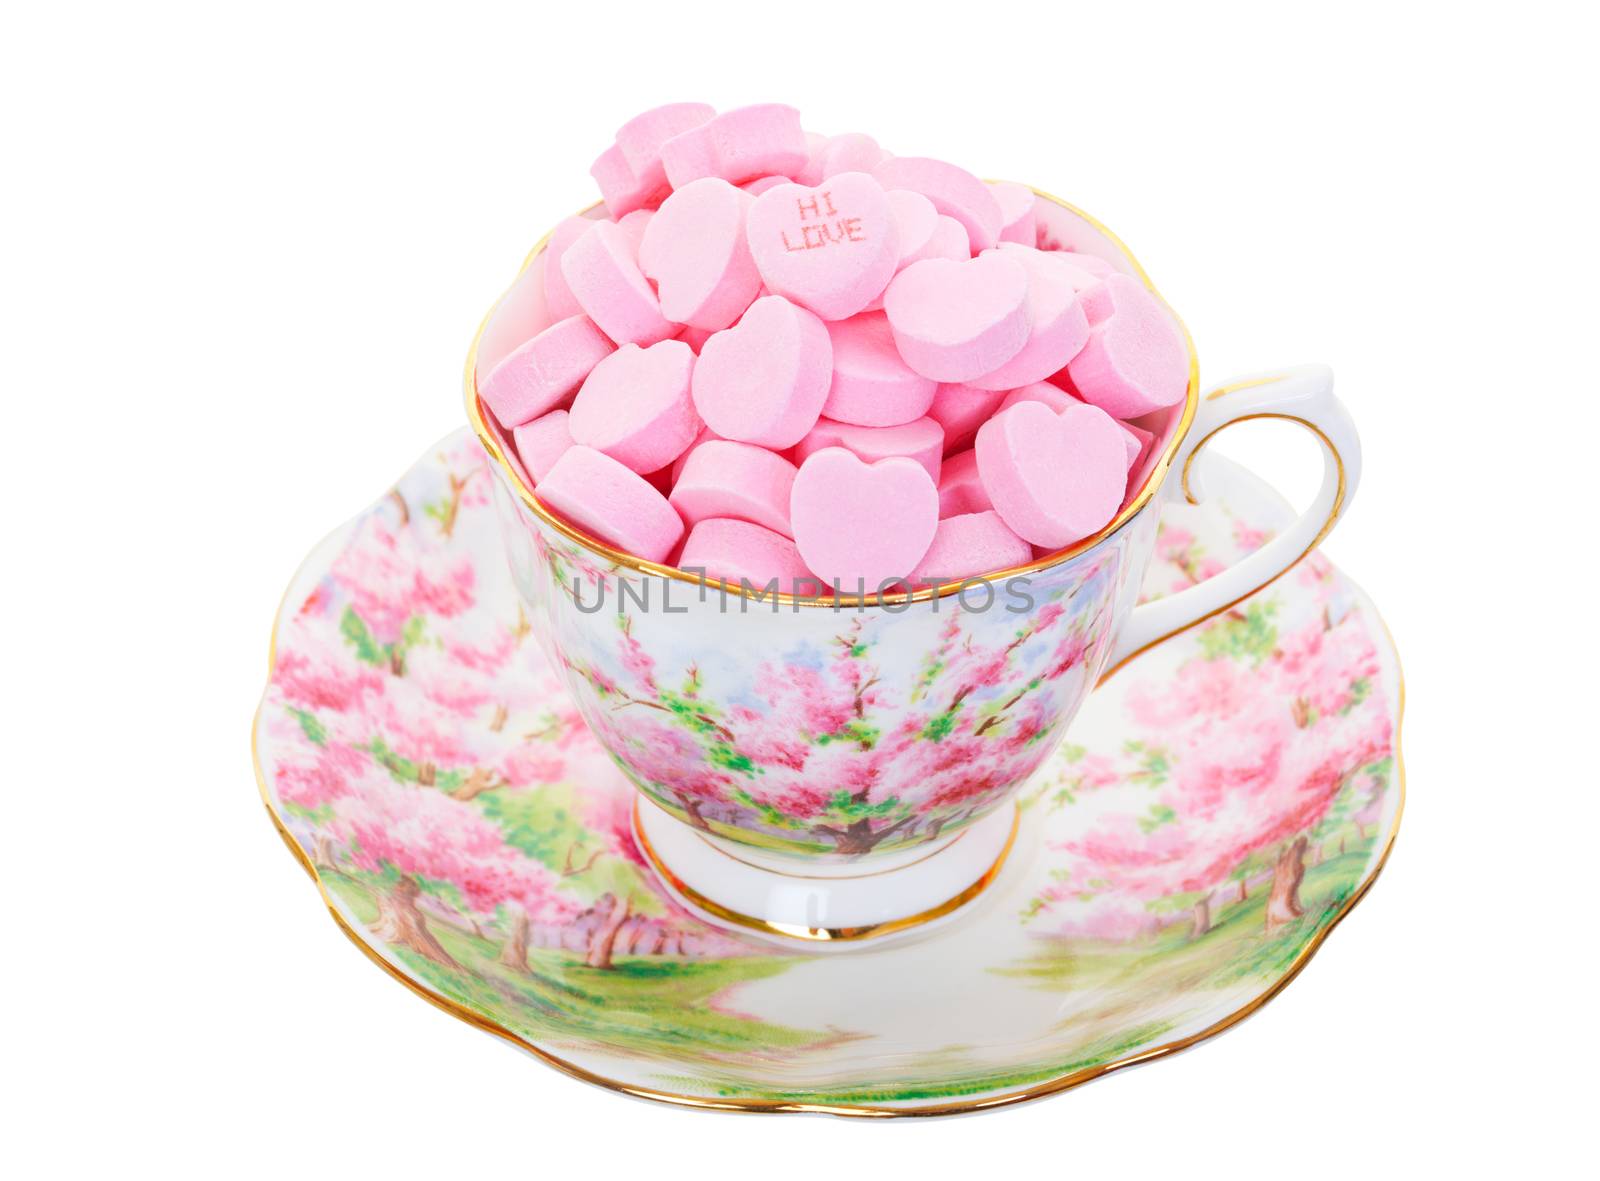 Pink candy hearts in a teacup and saucer.  Shot on white background.